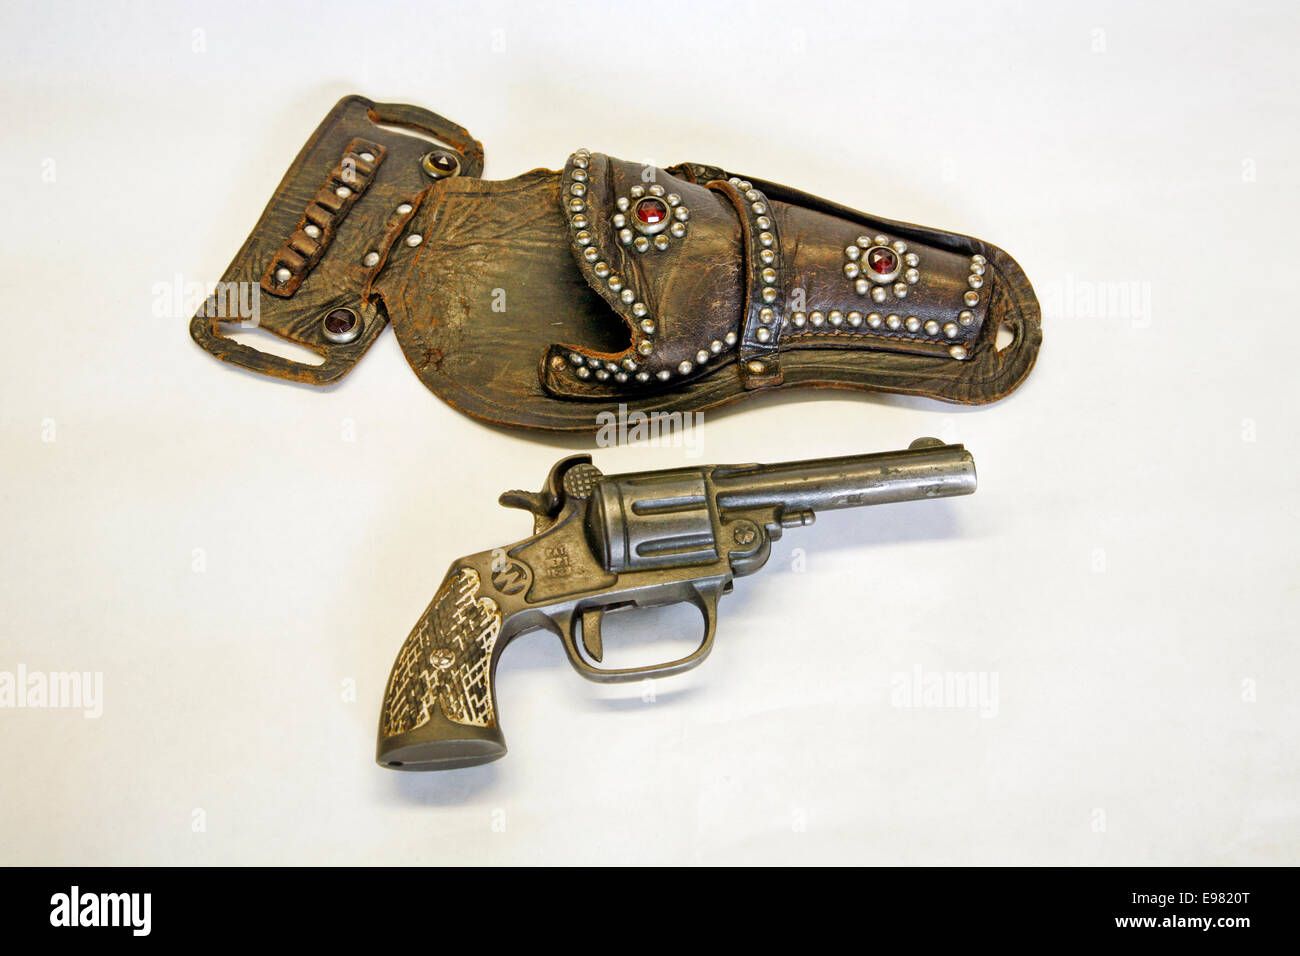 an-antique-cap-pistol-and-leather-holster-circa-1900-E9820T.jpg